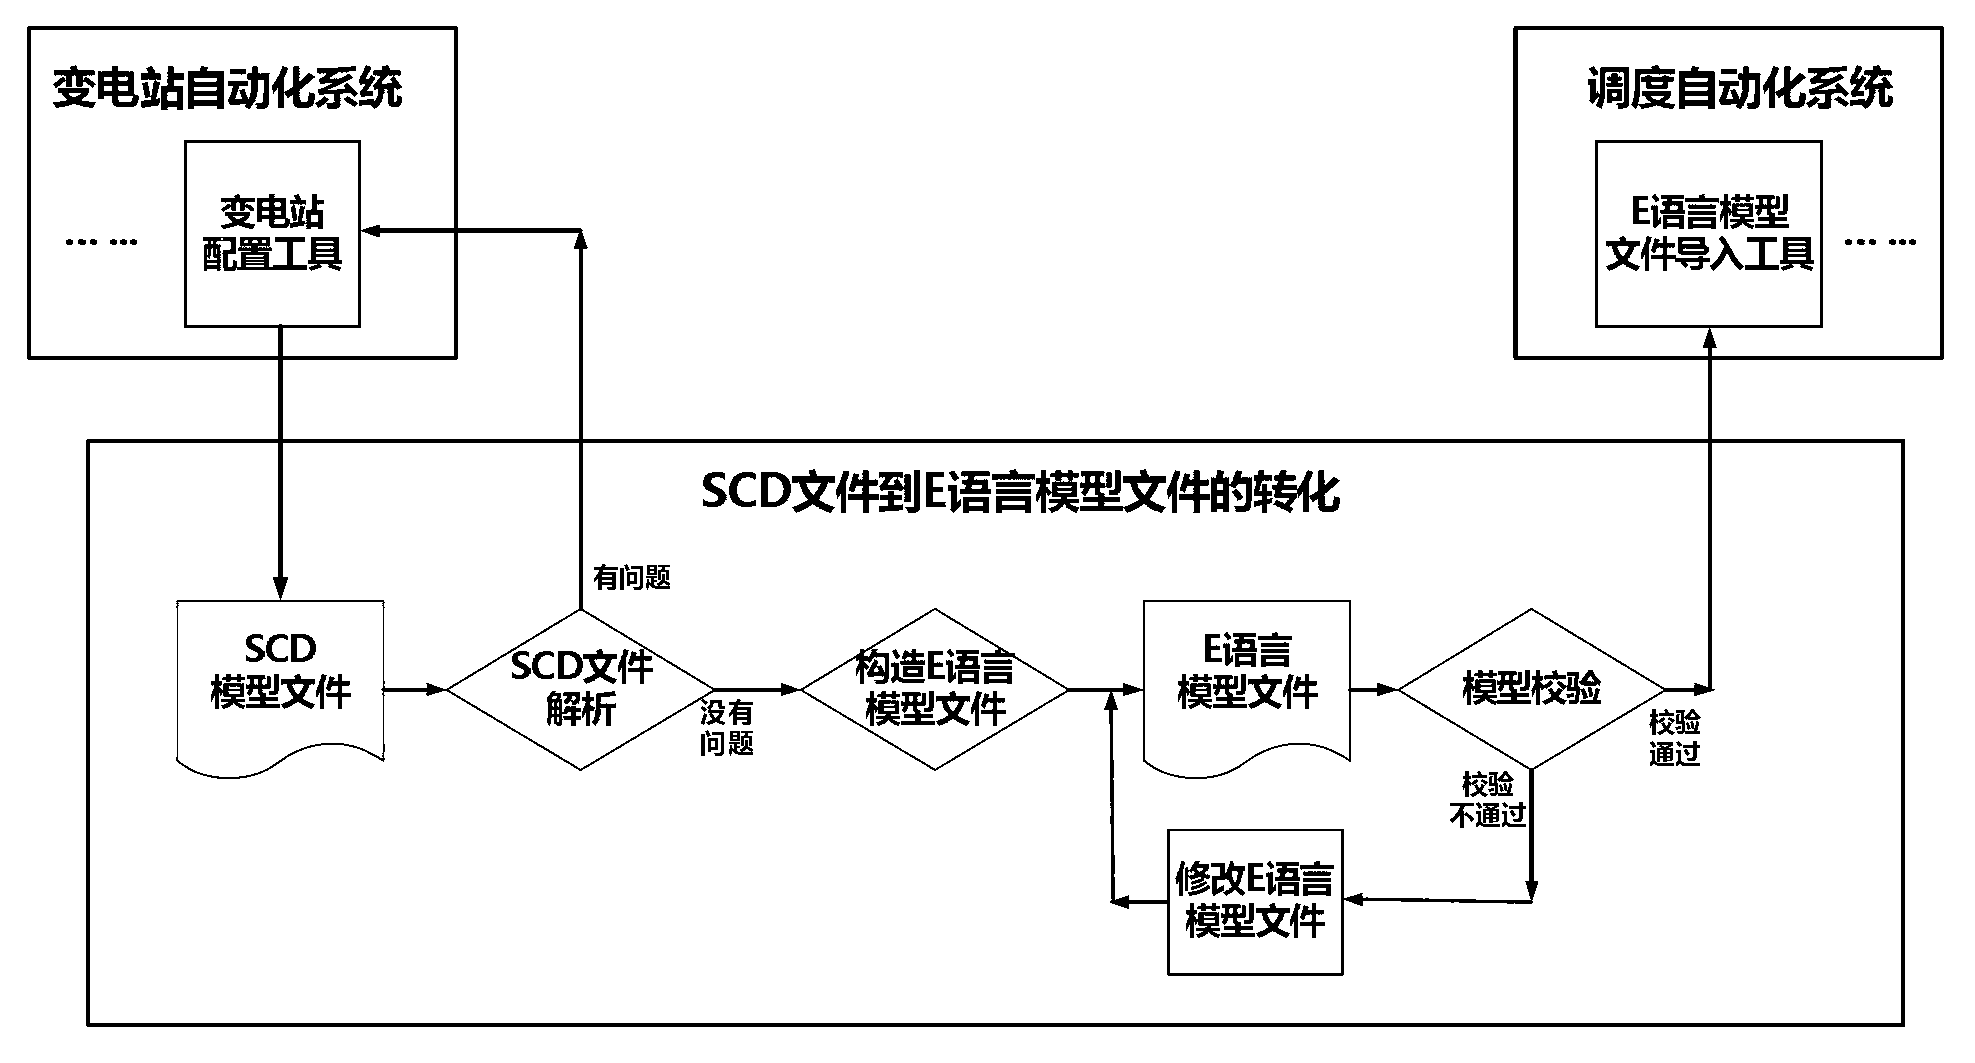 Method for coordinating and sharing transformer substation end and dispatching end model based on E language